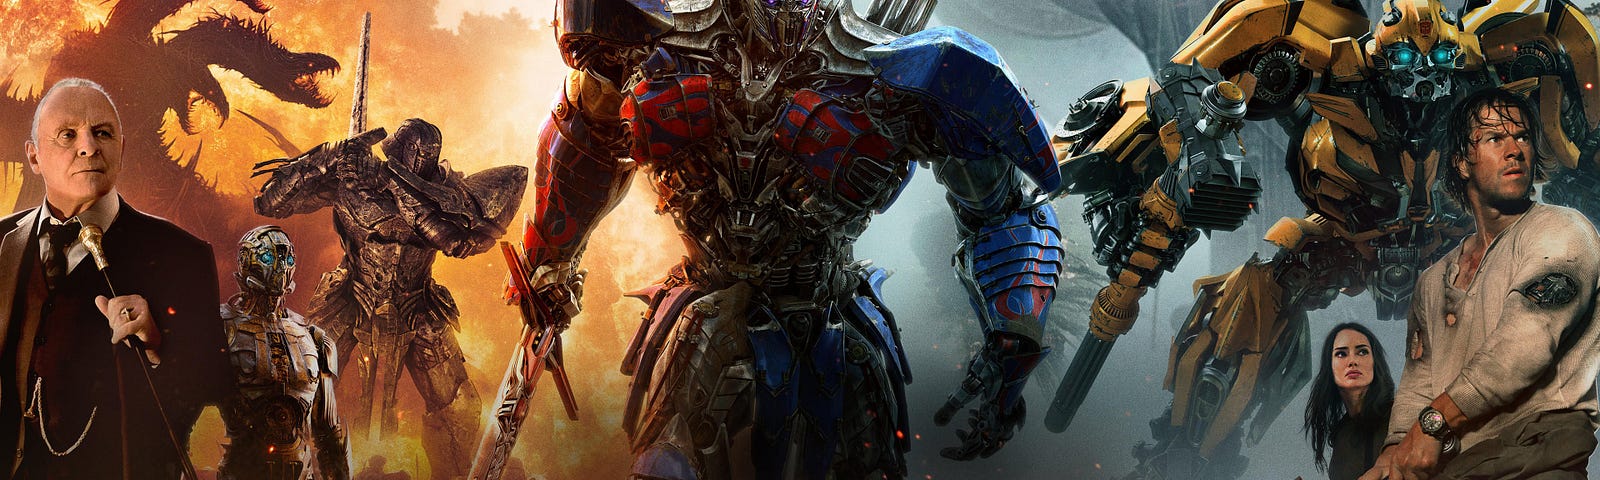 transformers the last knight film streaming